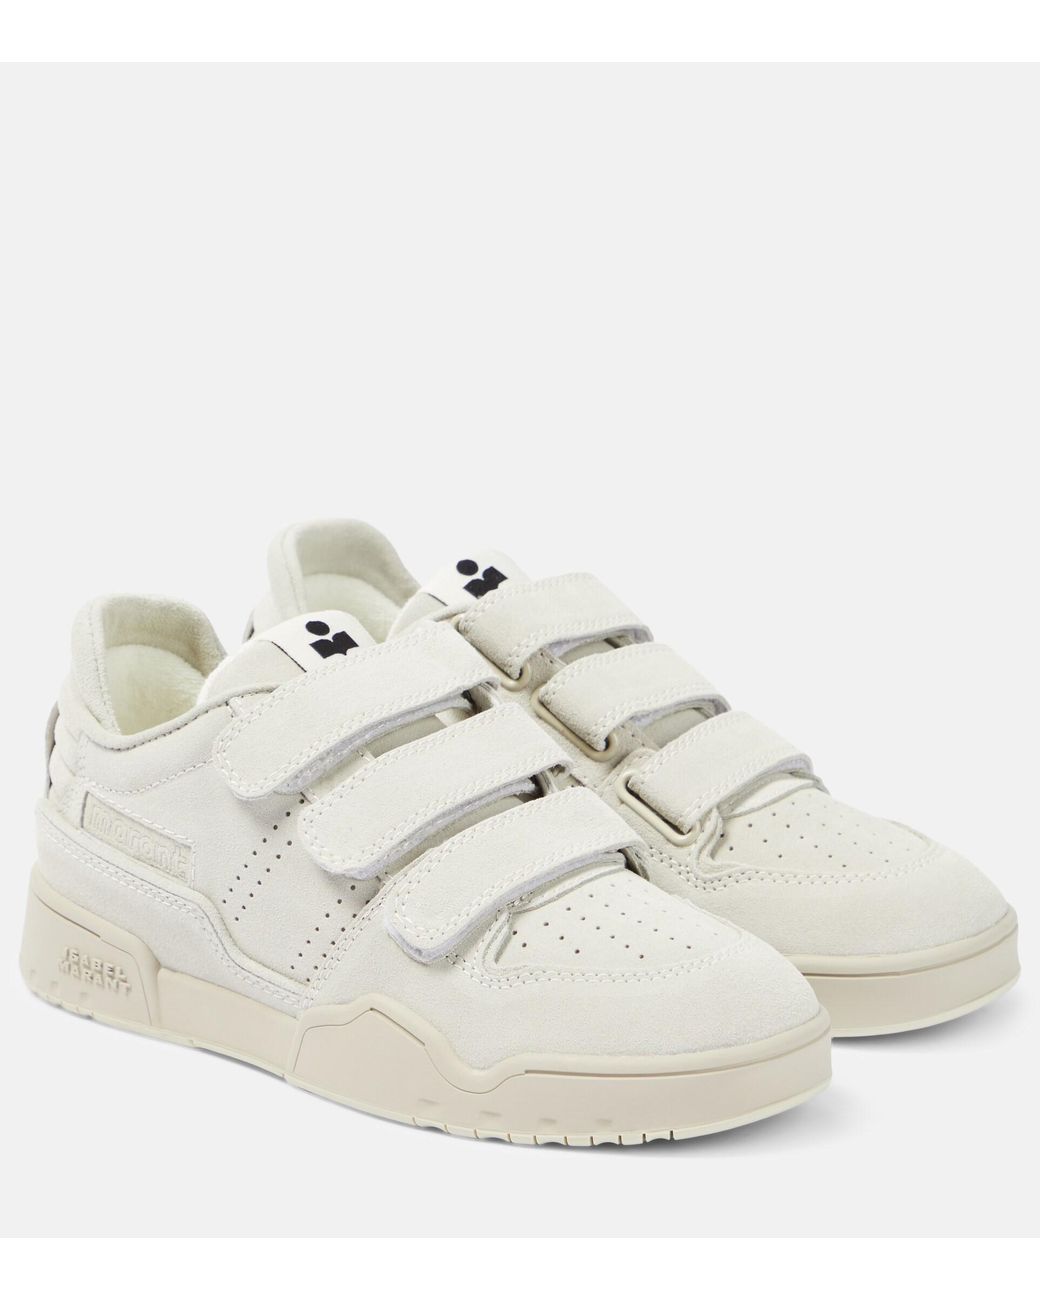 Isabel Marant Oney Low Suede Sneakers in White | Lyst